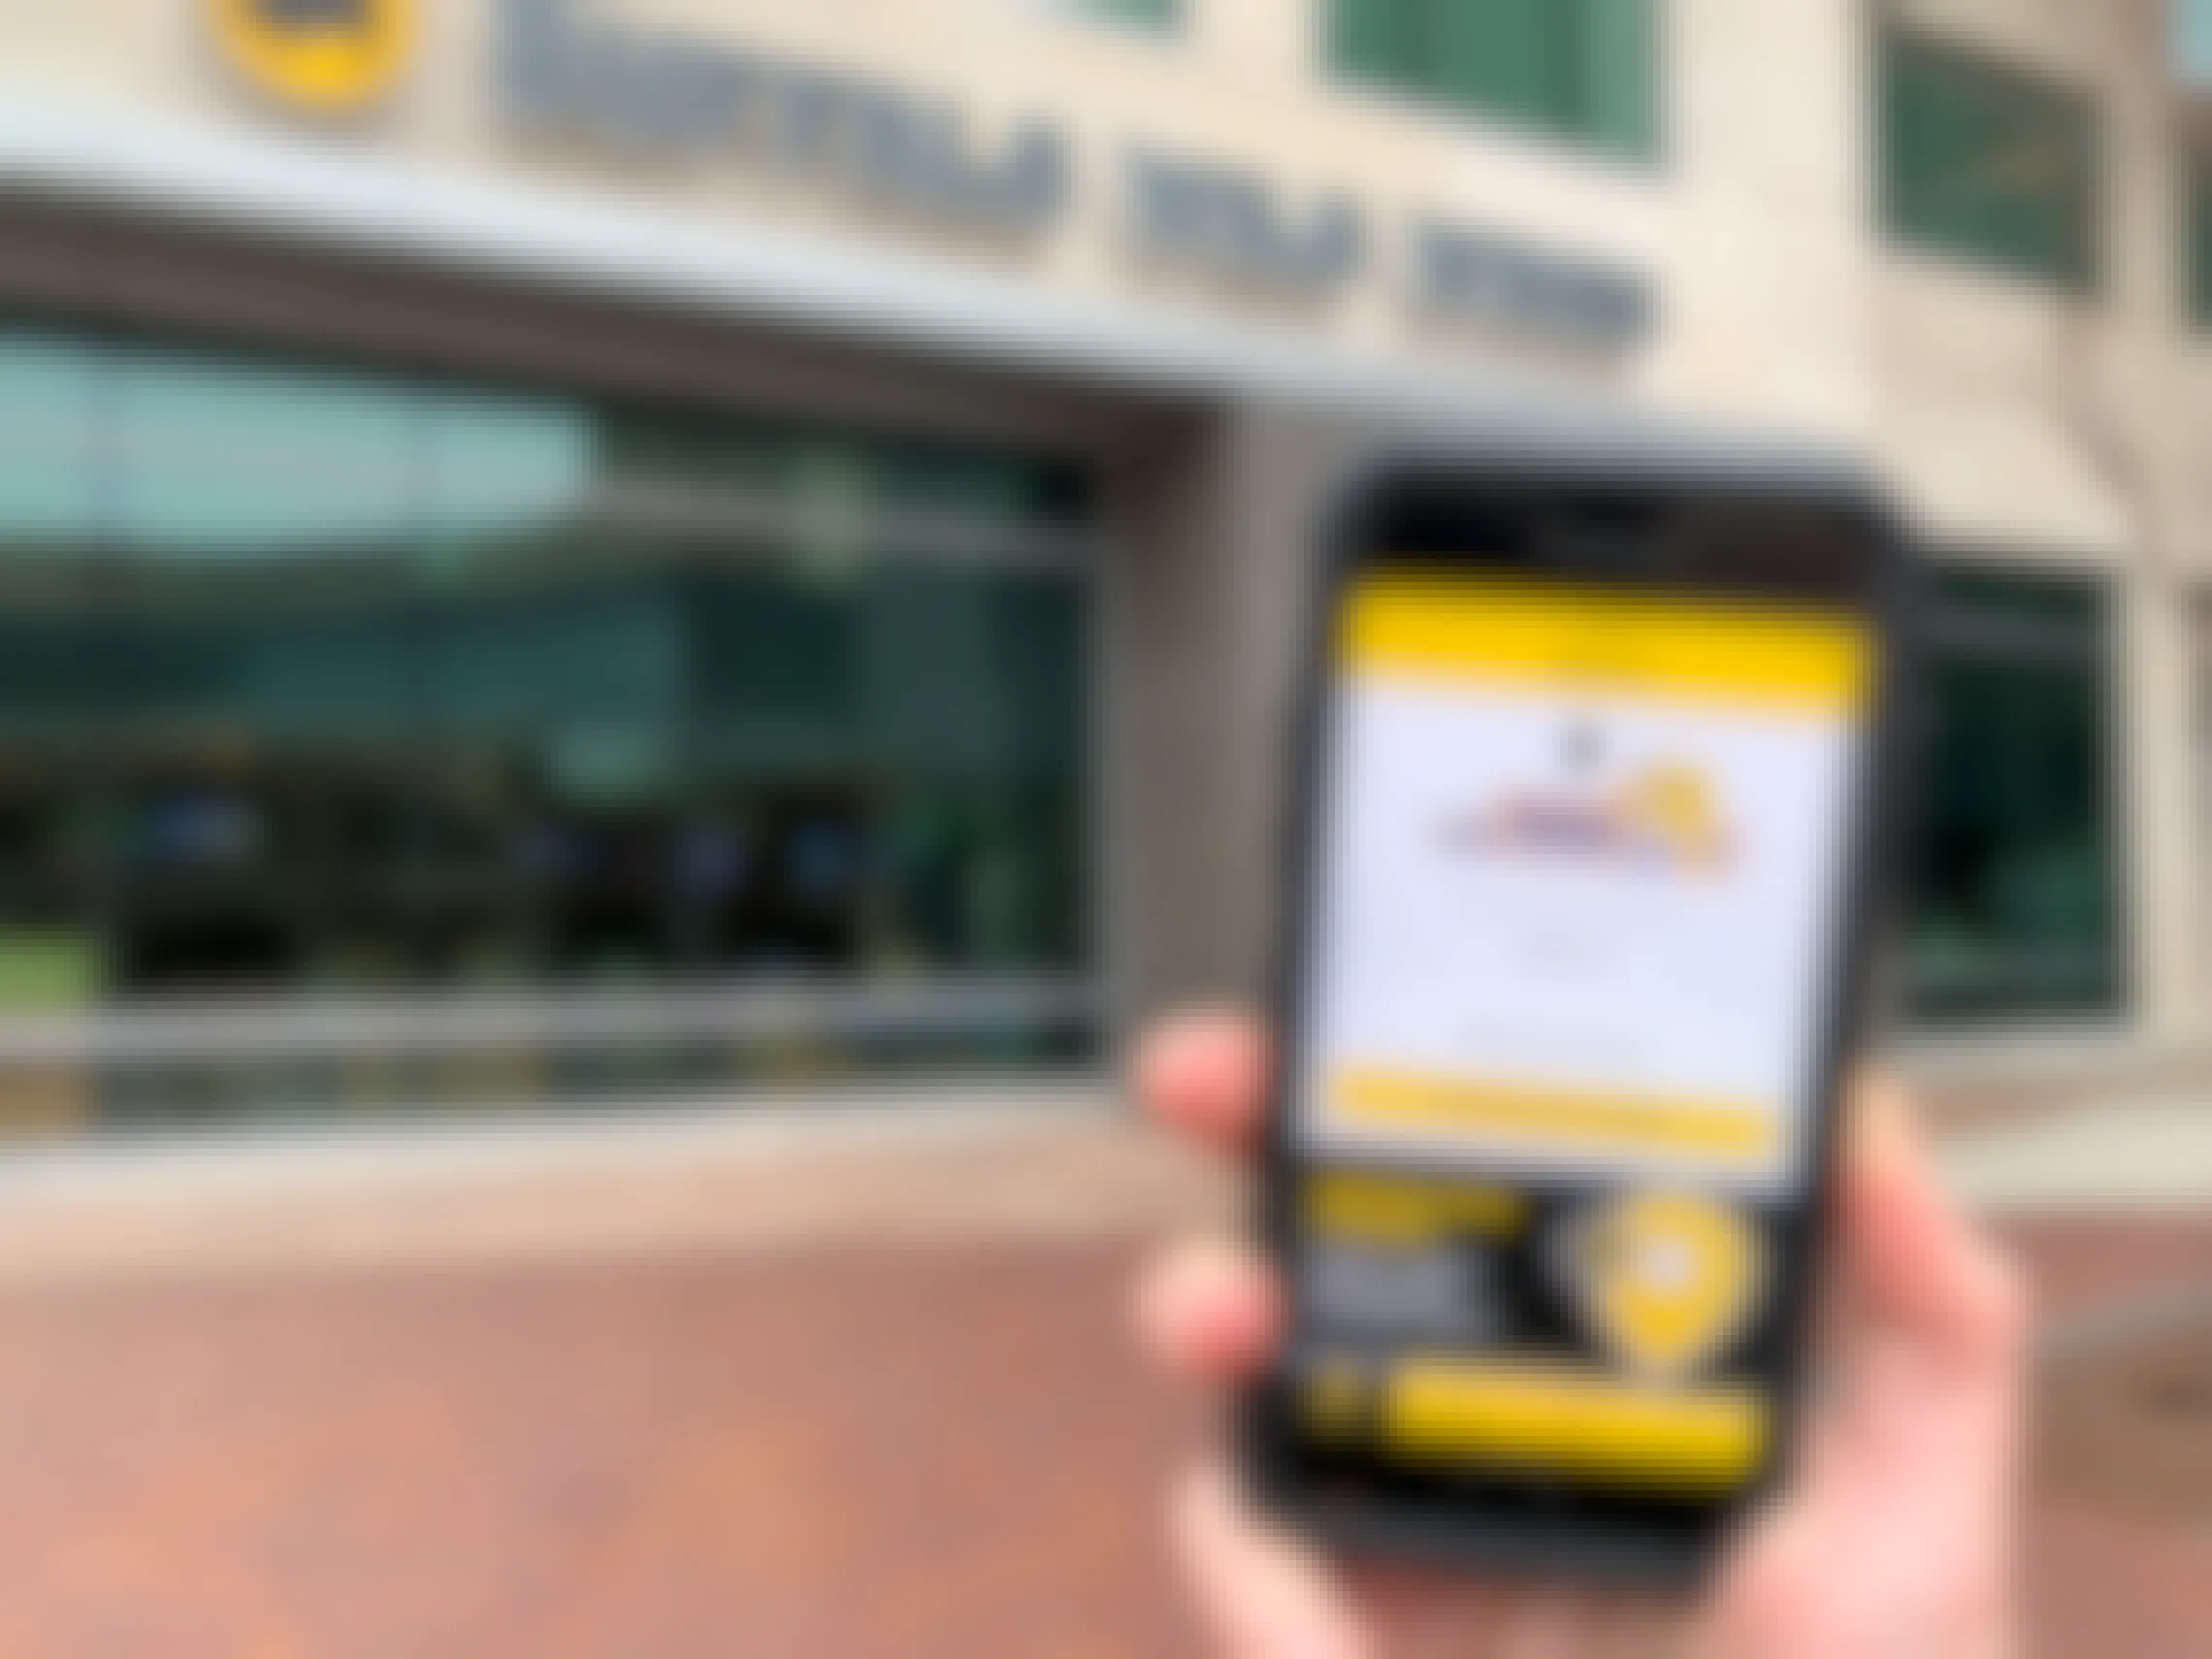 The Checkin portal on the Buffalo Wild Wings App outside the restaurant.